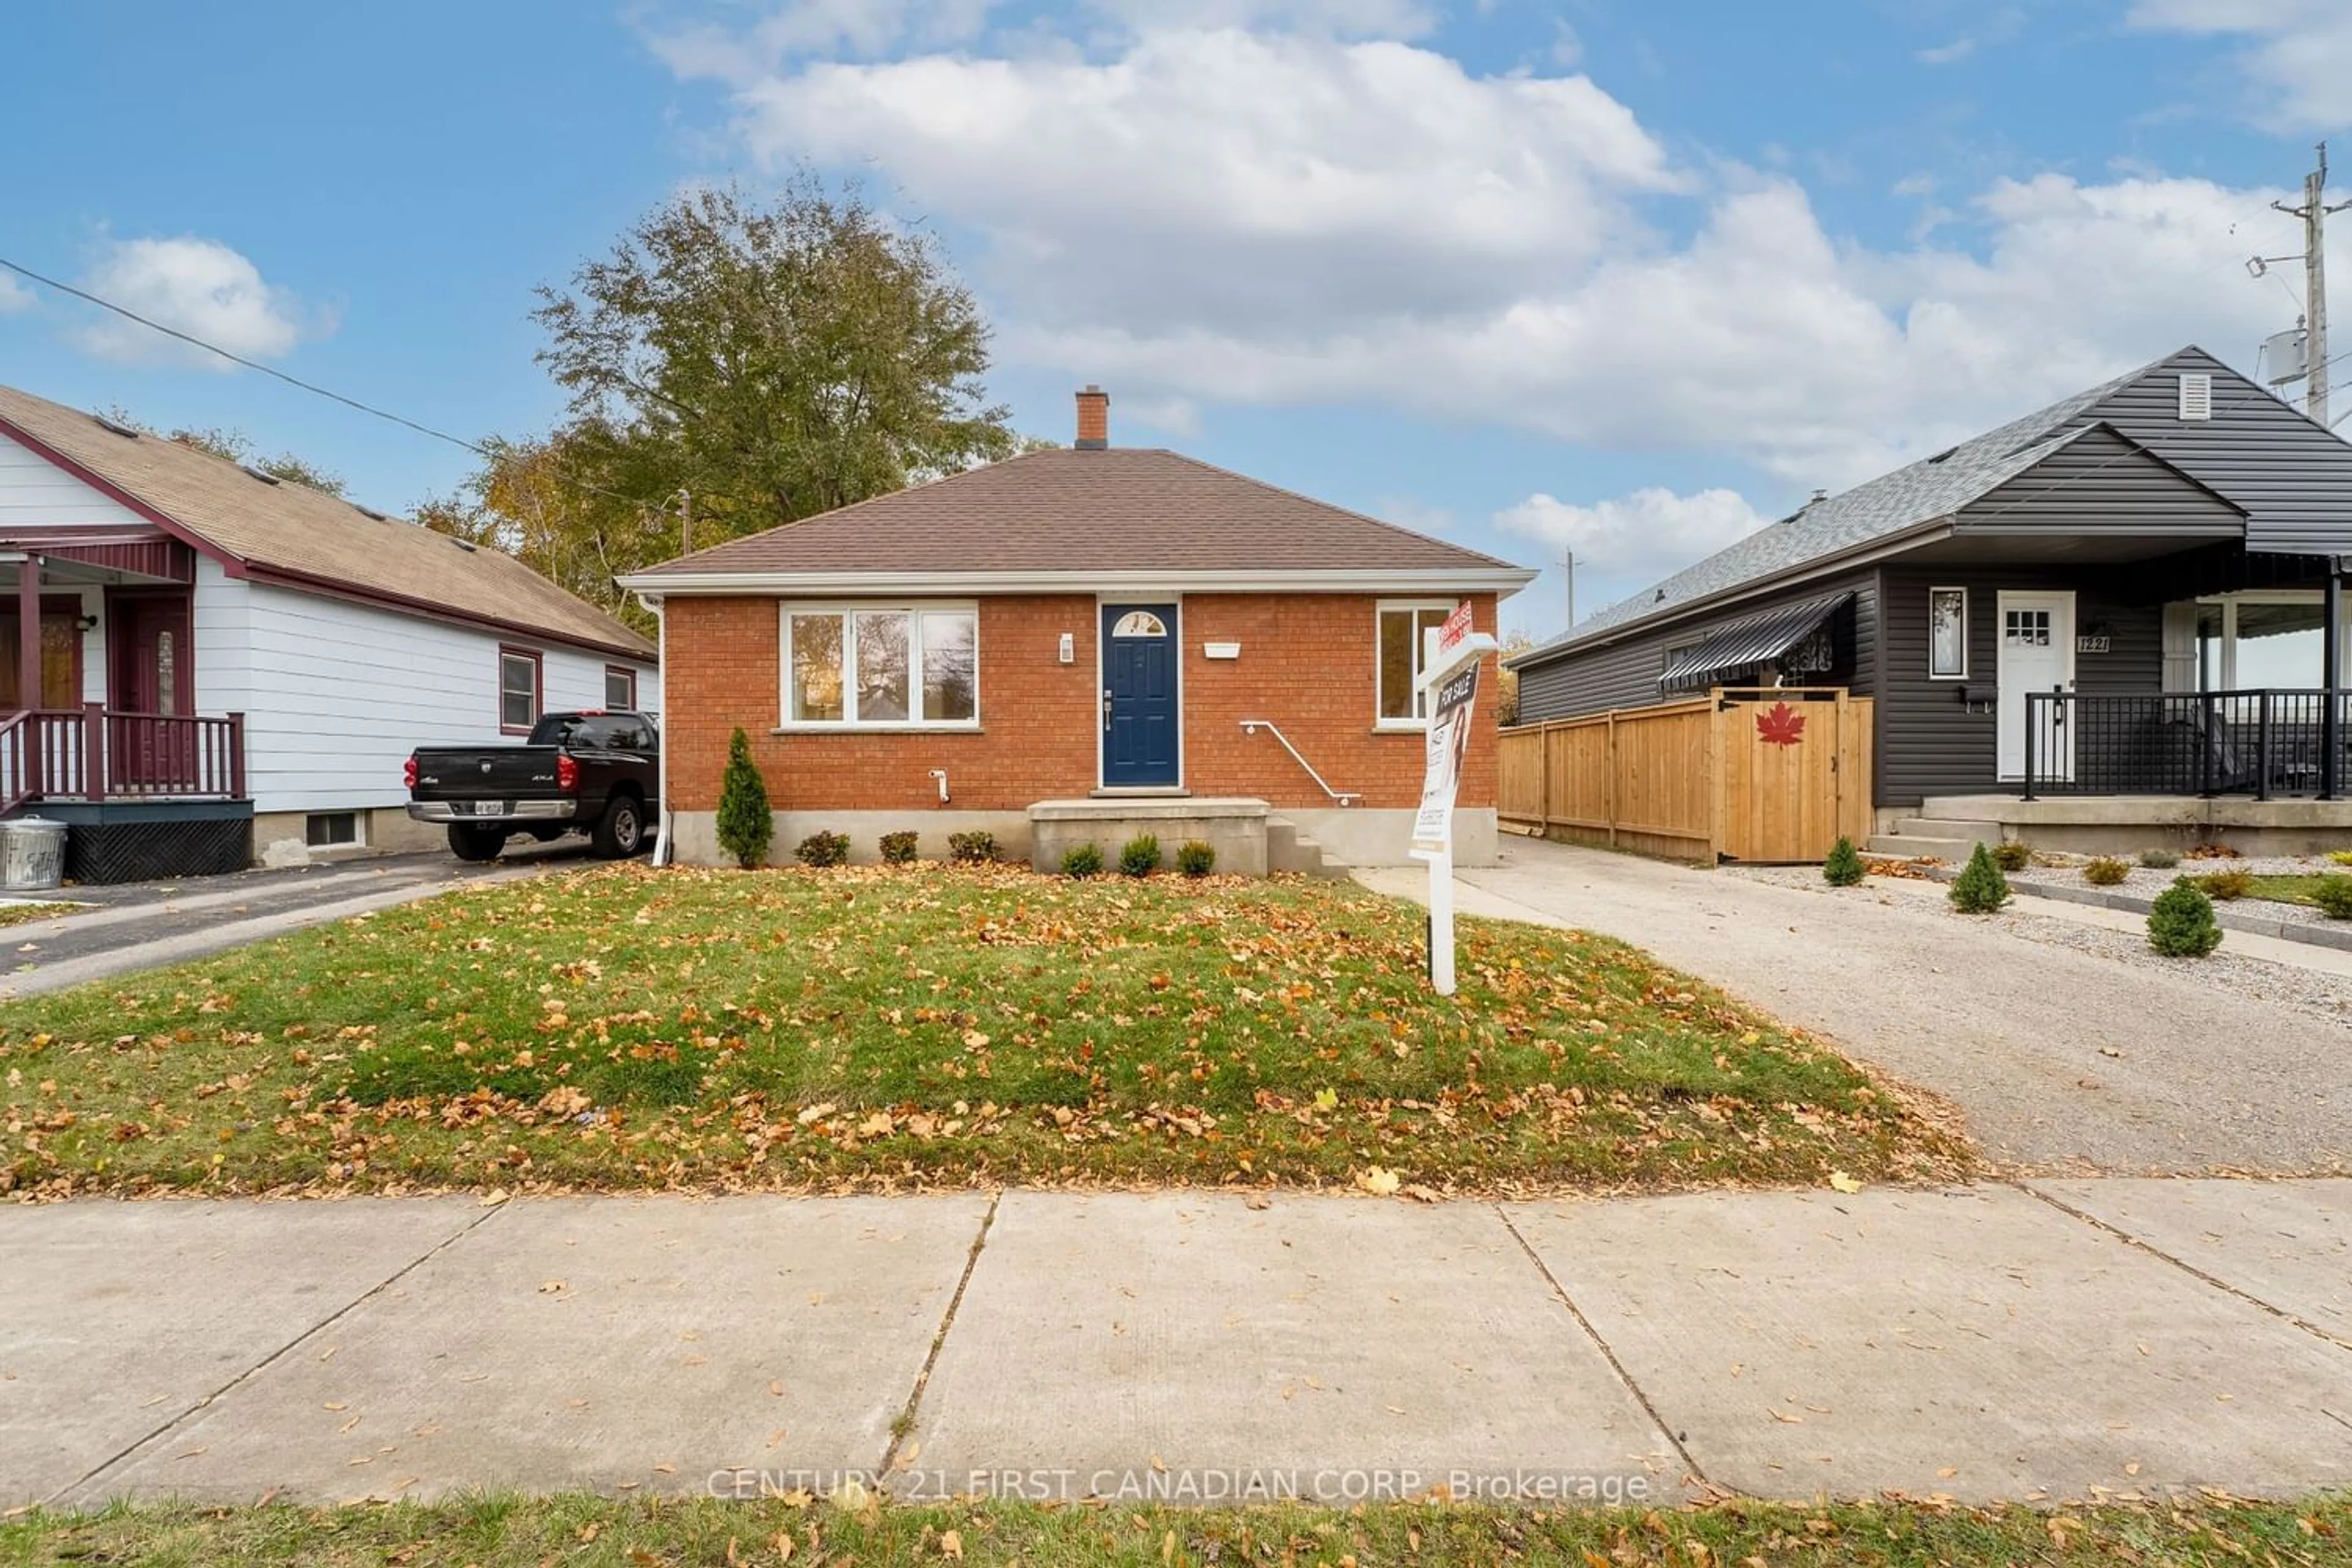 Frontside or backside of a home for 1223 Langmuir Ave, London Ontario N5W 2E9